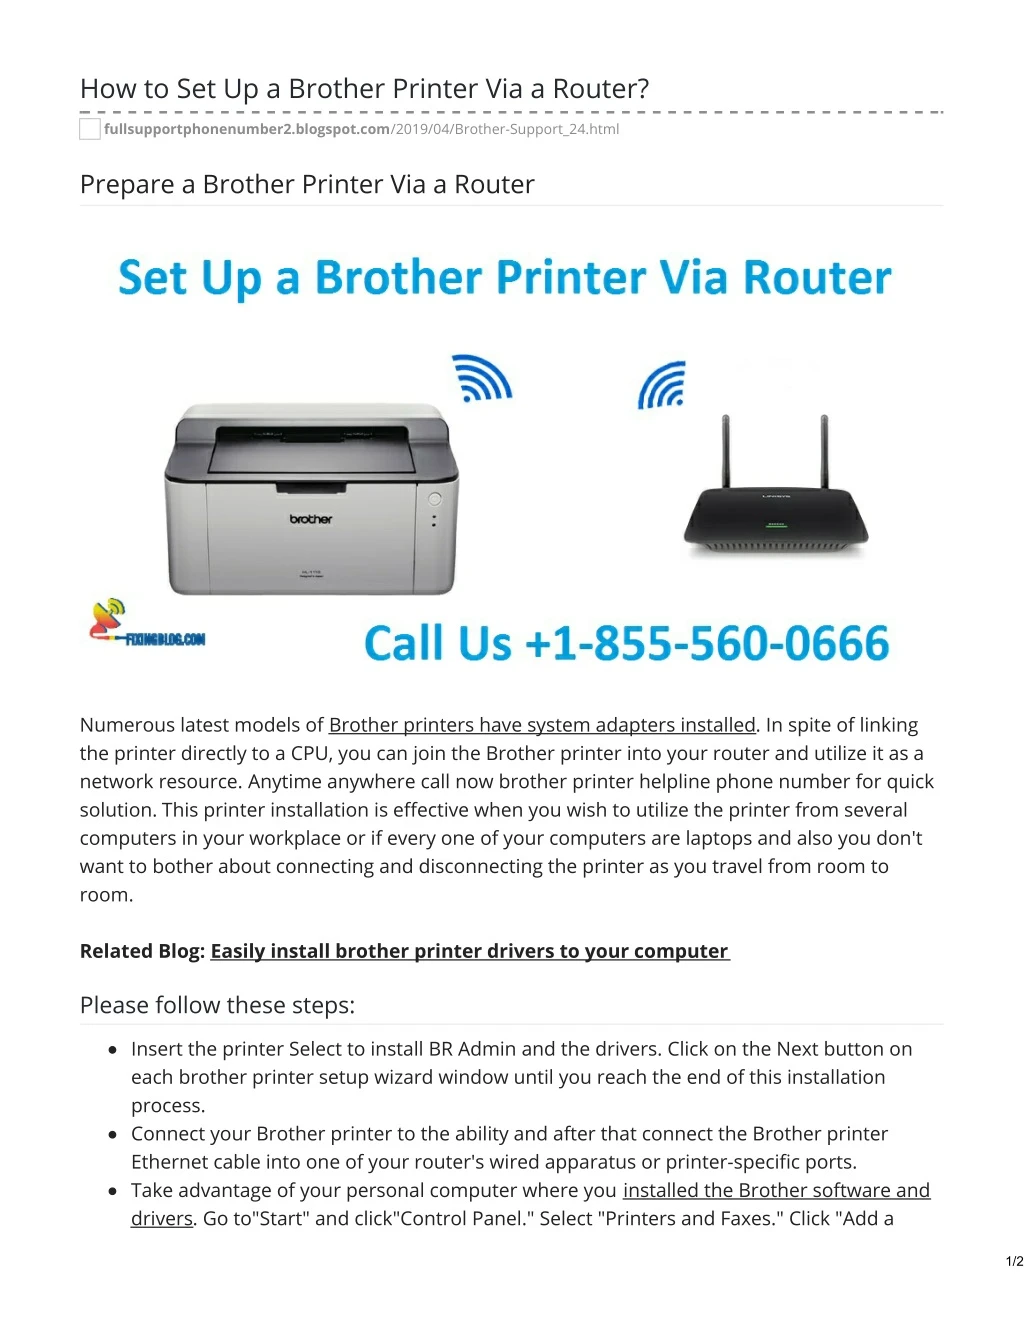 how to set up a brother printer via a router